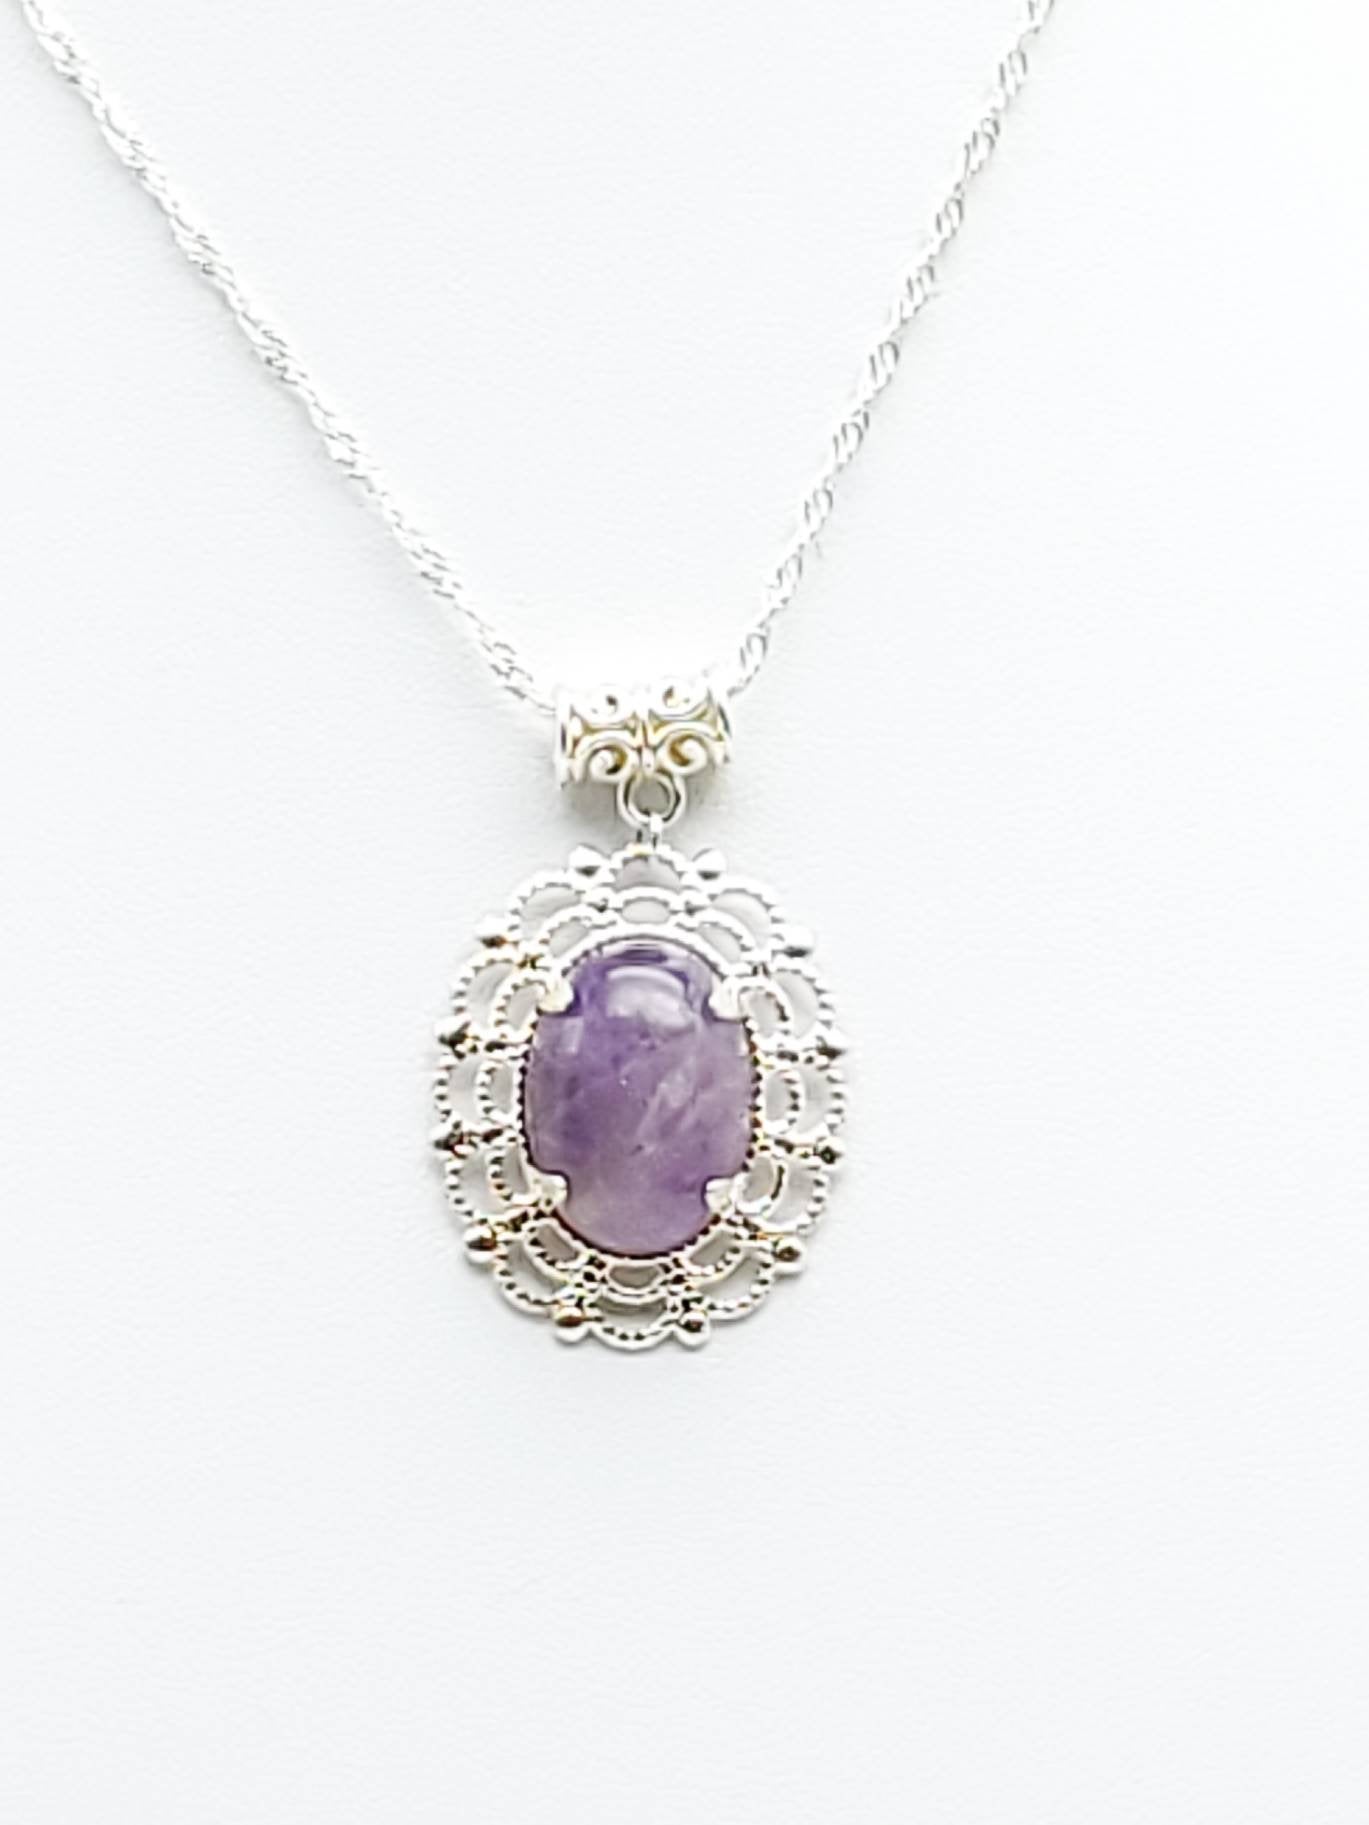 Amethyst Cabochon Pendant Necklace - The Caffeinated Raven